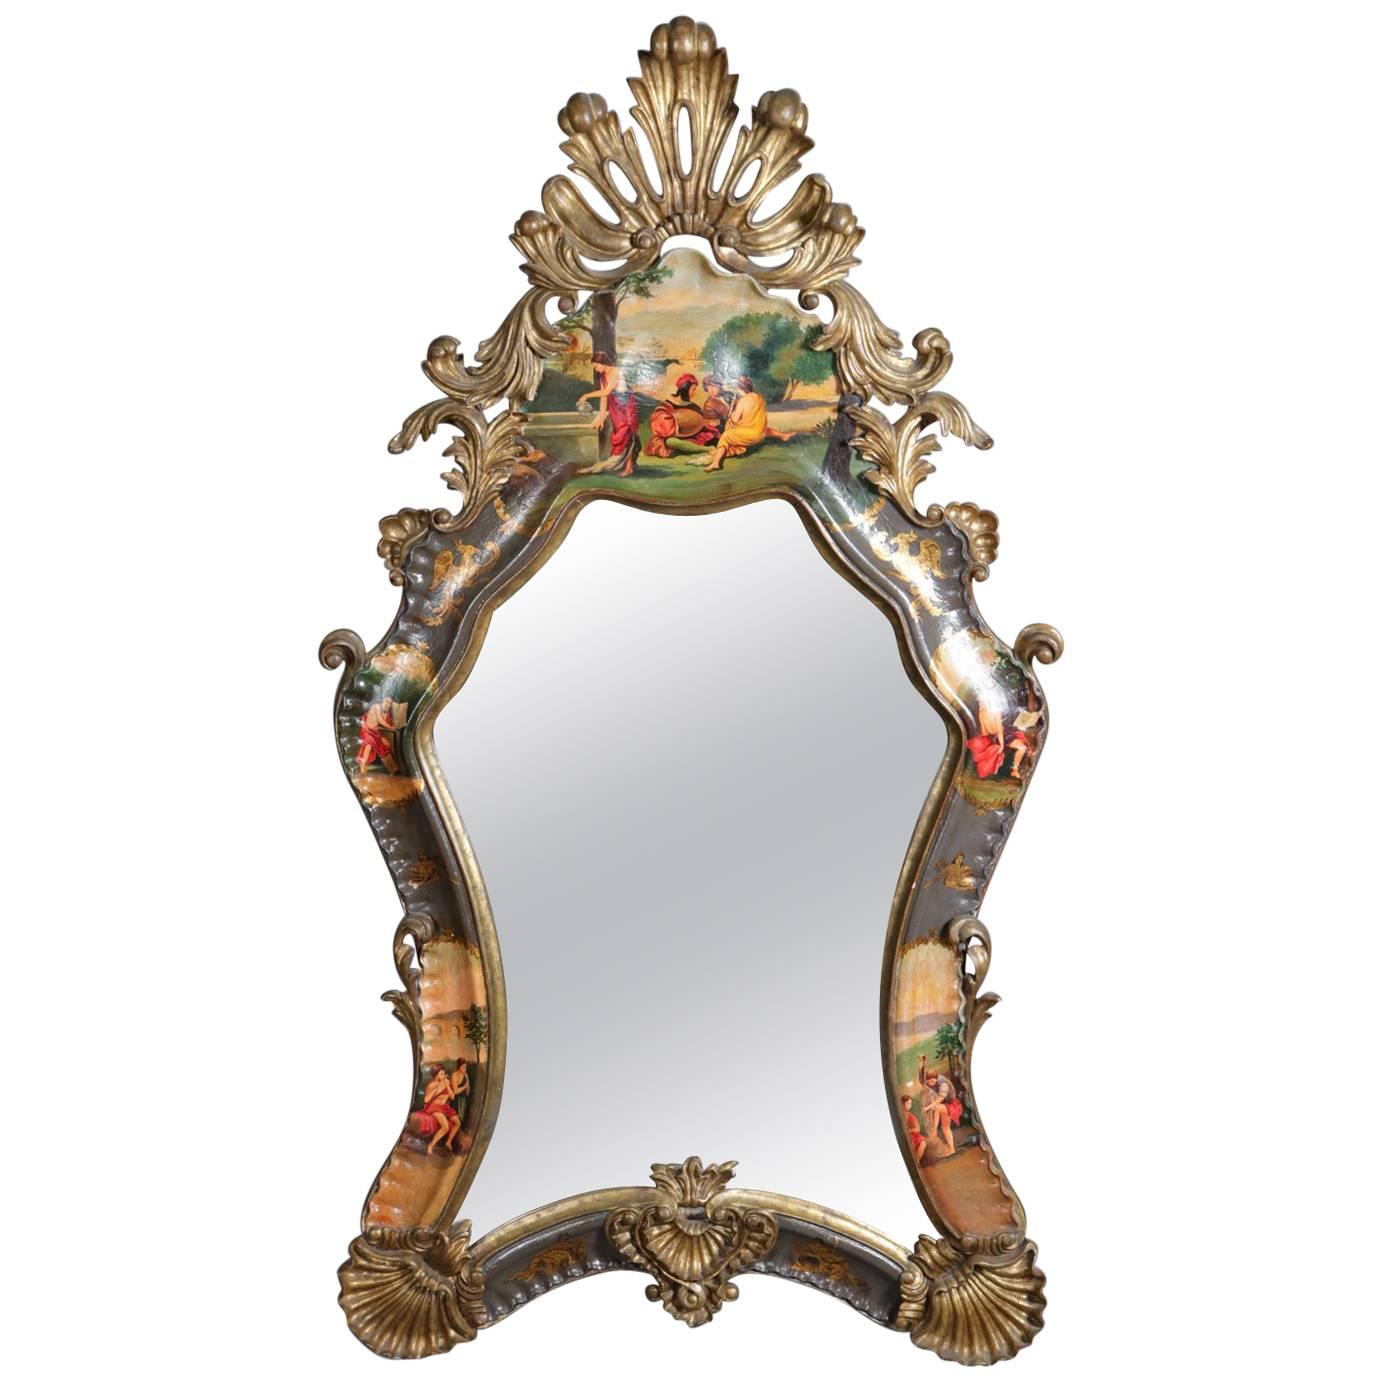 Monumental Italian Baroque Carved, Gilt and Hand Painted Wall Mirror